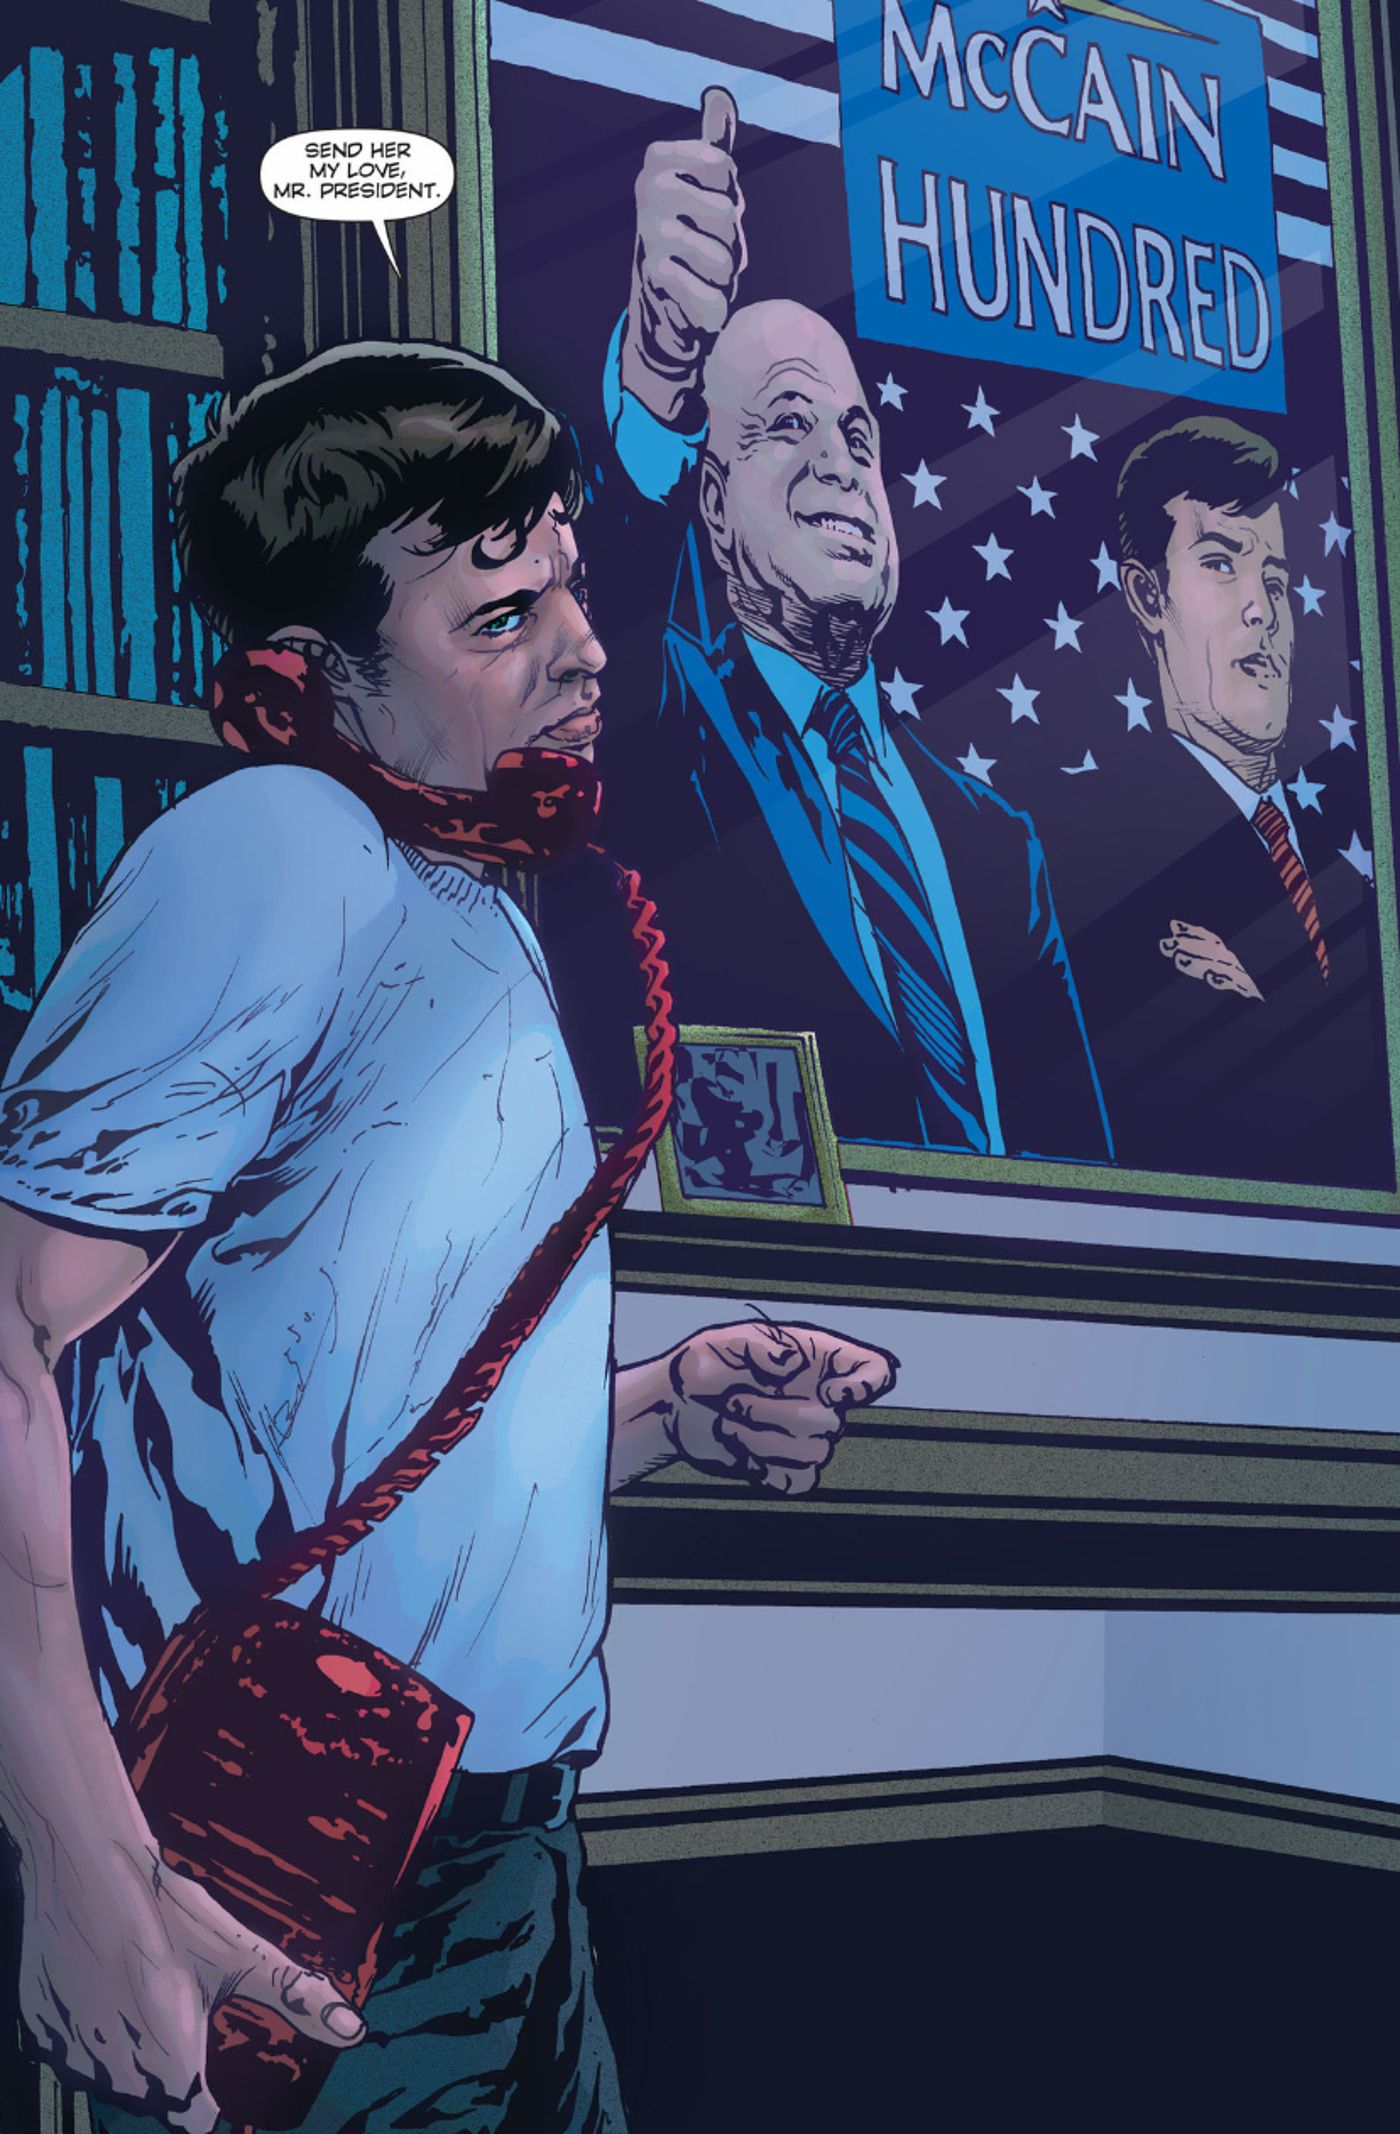 panel from Ex Machina #50, Mitchell Hundred is John McCain's Vice President